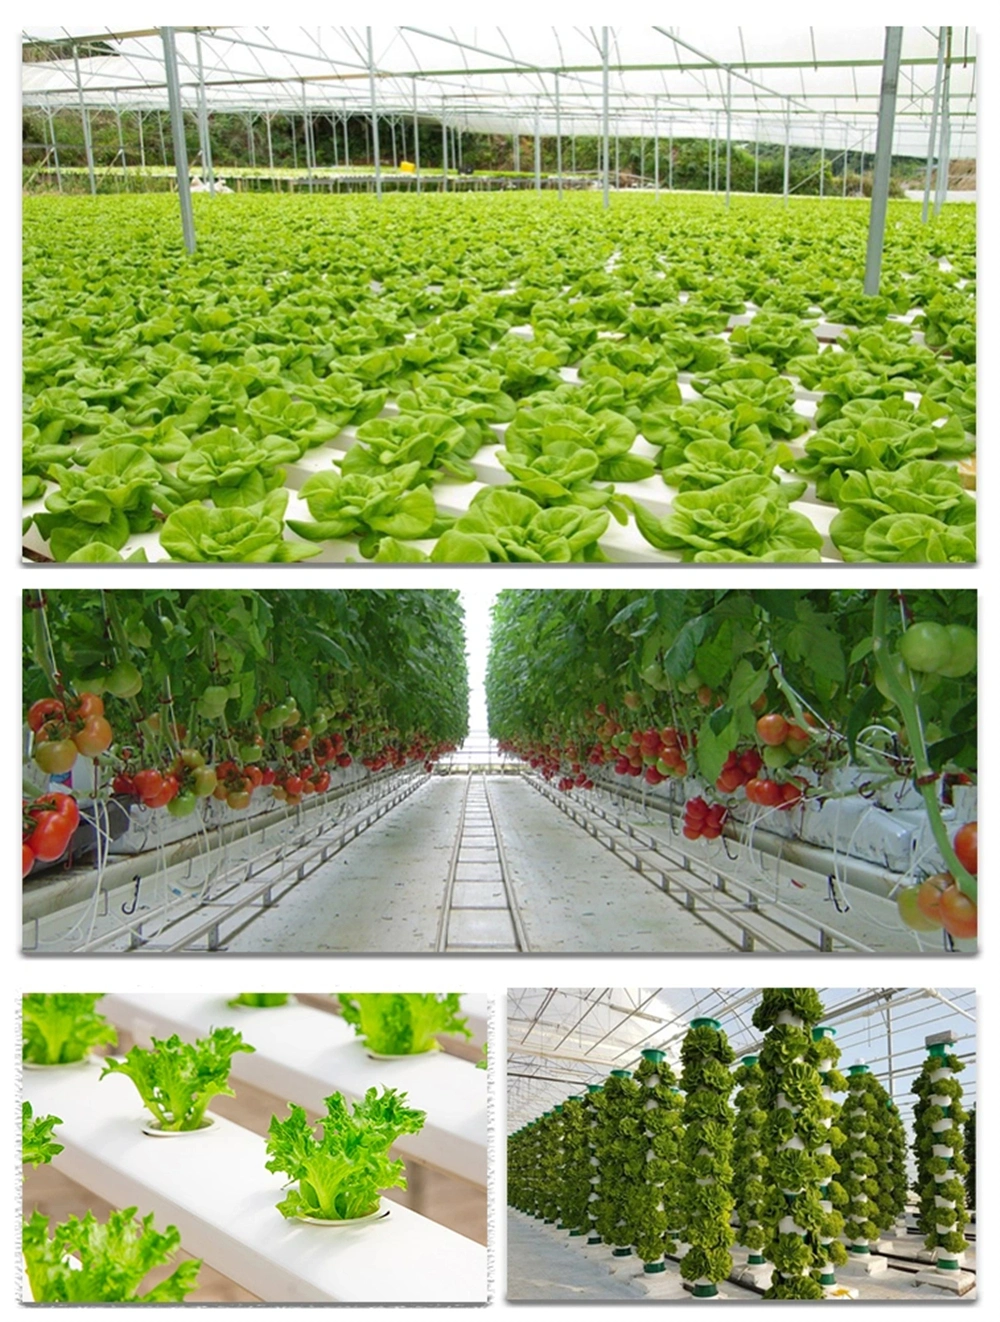 Agriculture/Commercial Multi-Span Tunnel Plastic Film Grow Tents/Greenhouse for Vegetables/Flowers/Tomato/Cucumber